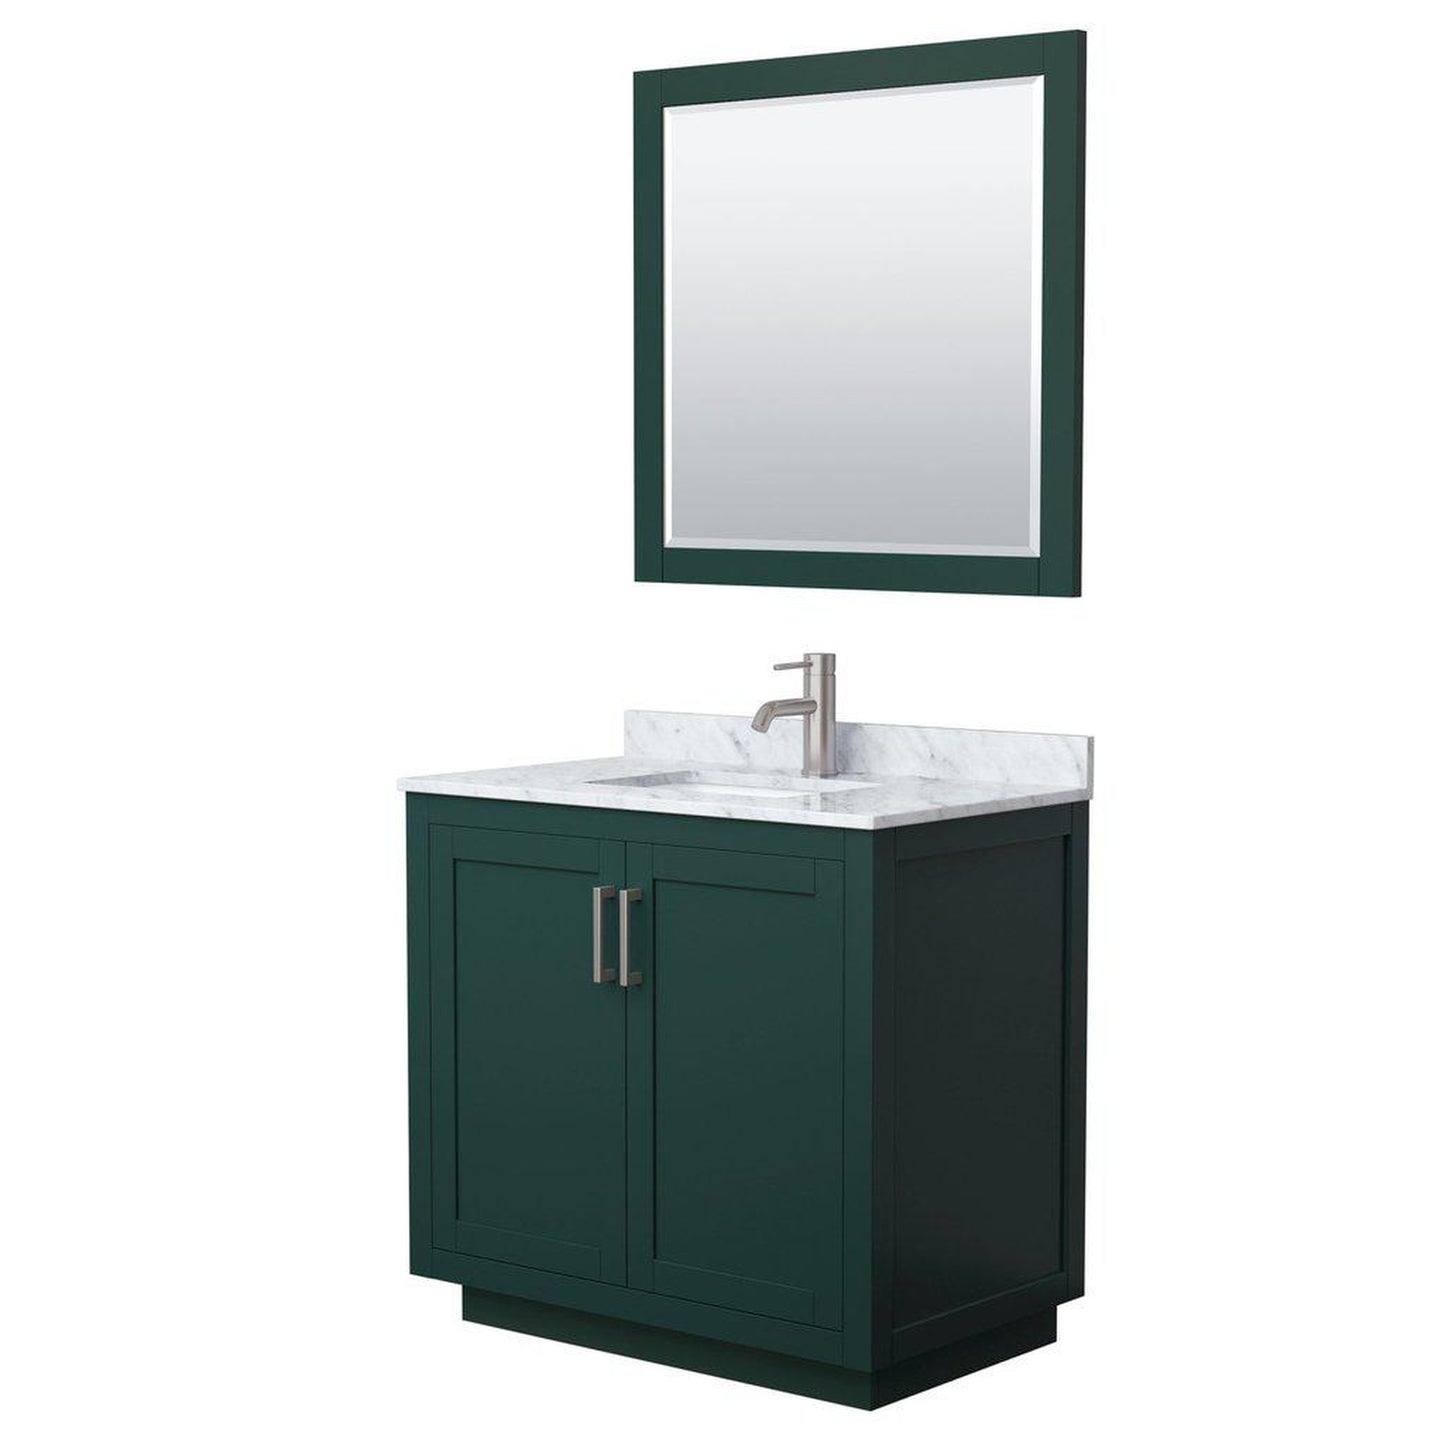 Wyndham Collection Miranda 36" Single Bathroom Green Vanity Set With White Carrara Marble Countertop, Undermount Square Sink, 34" Mirror And Brushed Nickel Trim